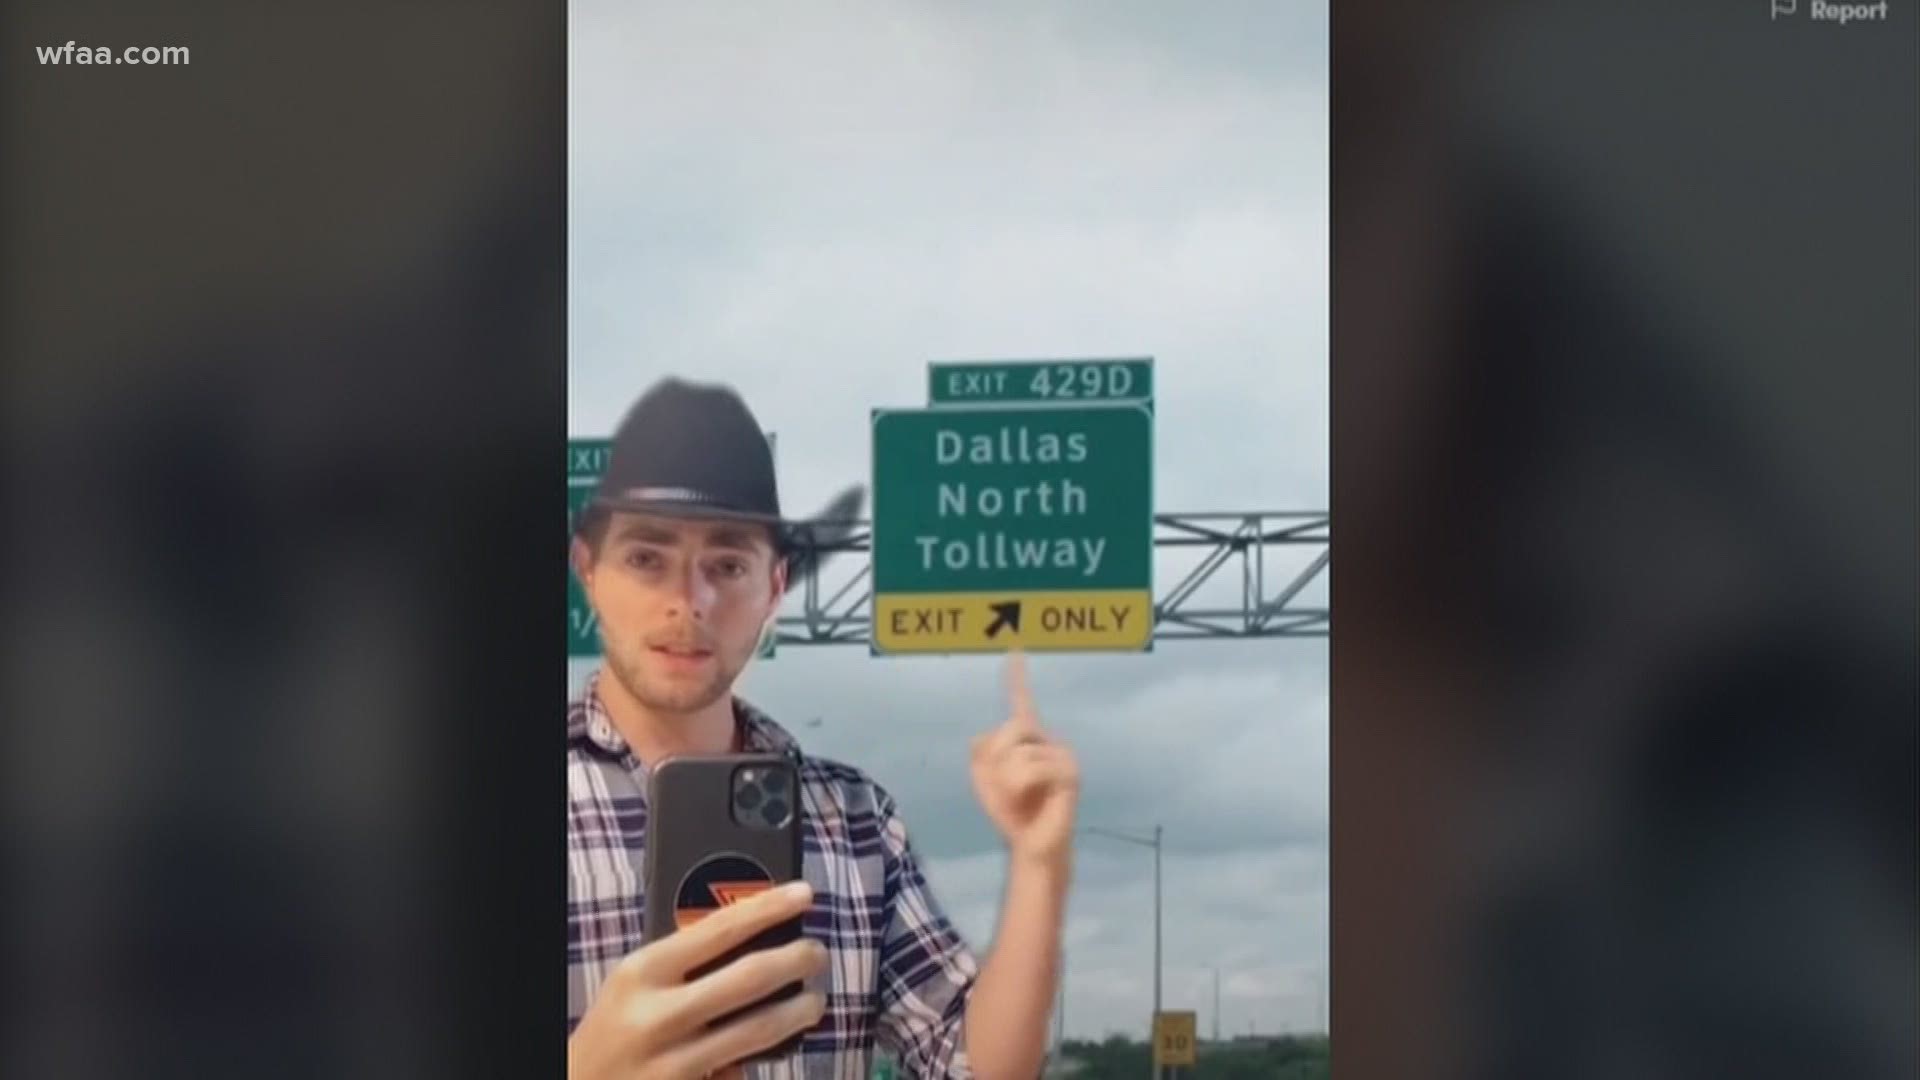 One man's video has gone viral on Tik Tok after he described Texas roads to "out of state drivers."